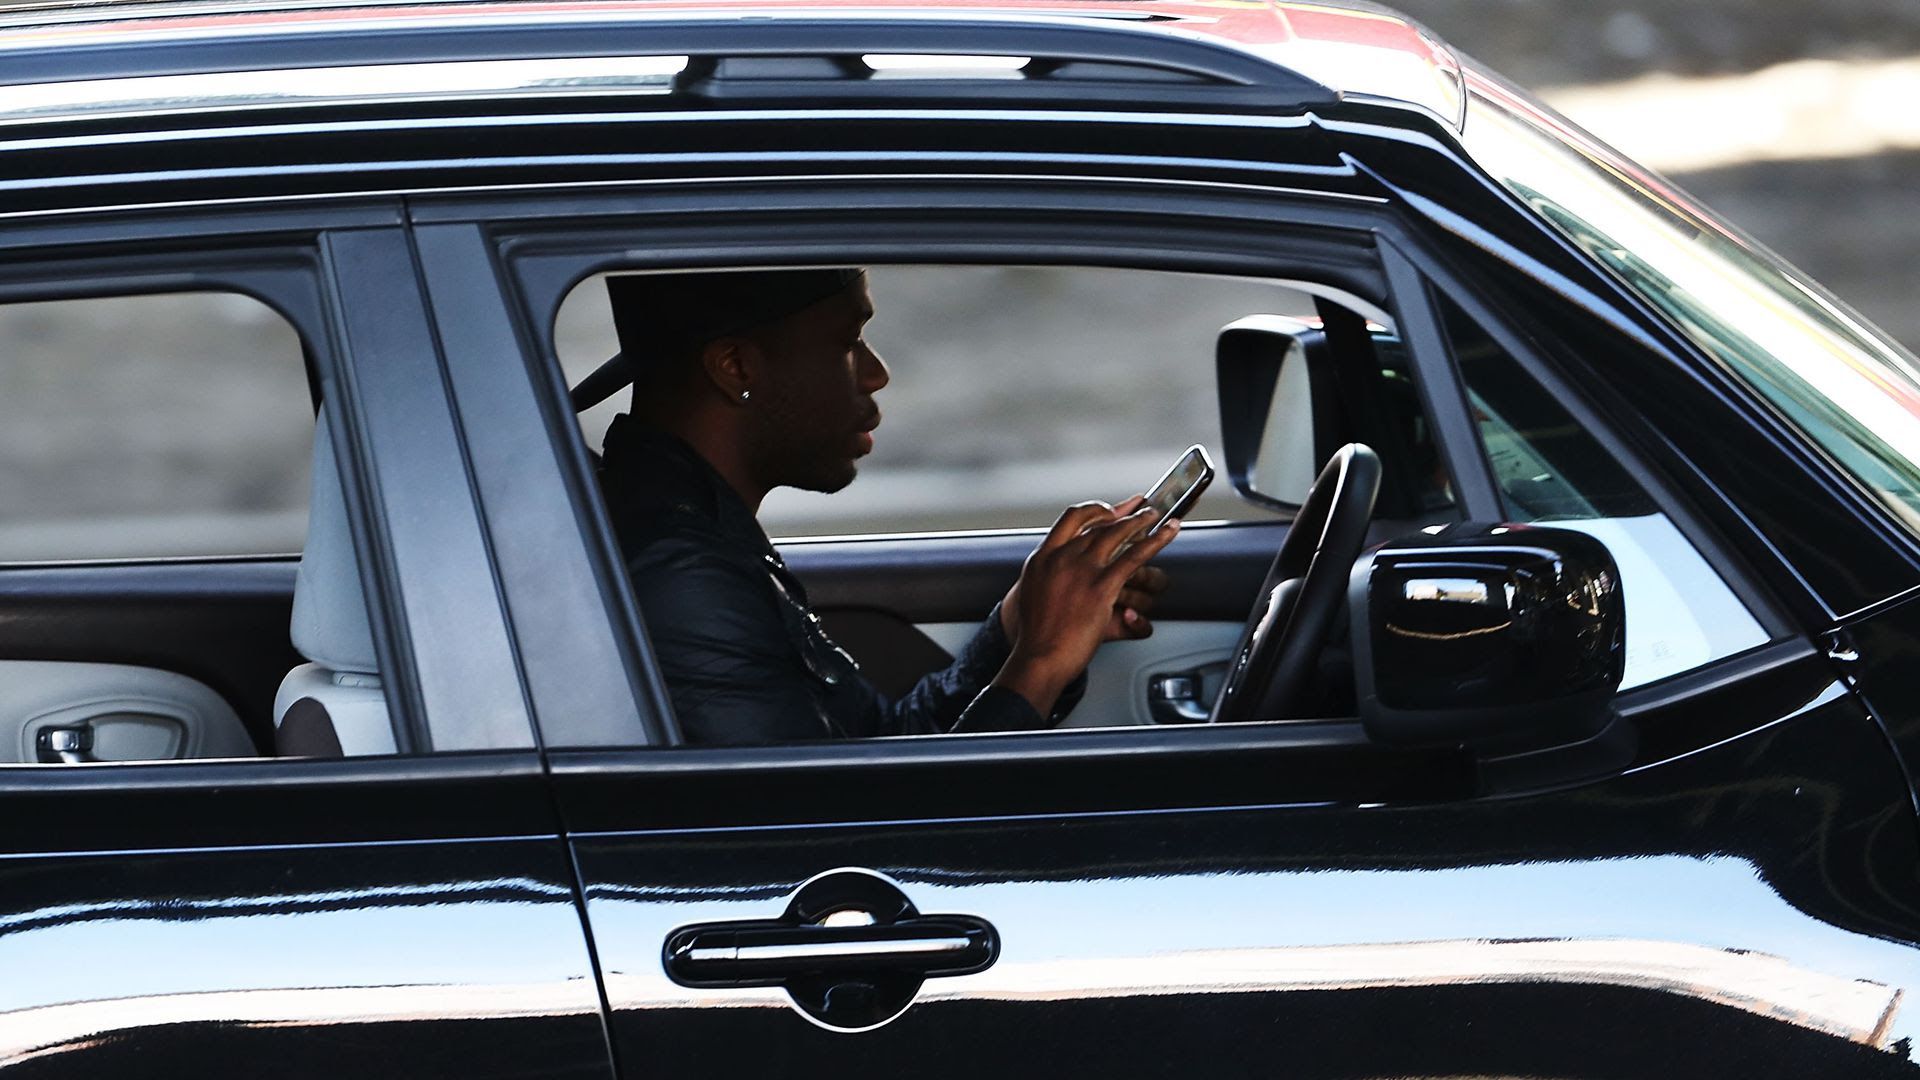 A man using a phone while driving. Photo: Spencer Platt/Getty Images